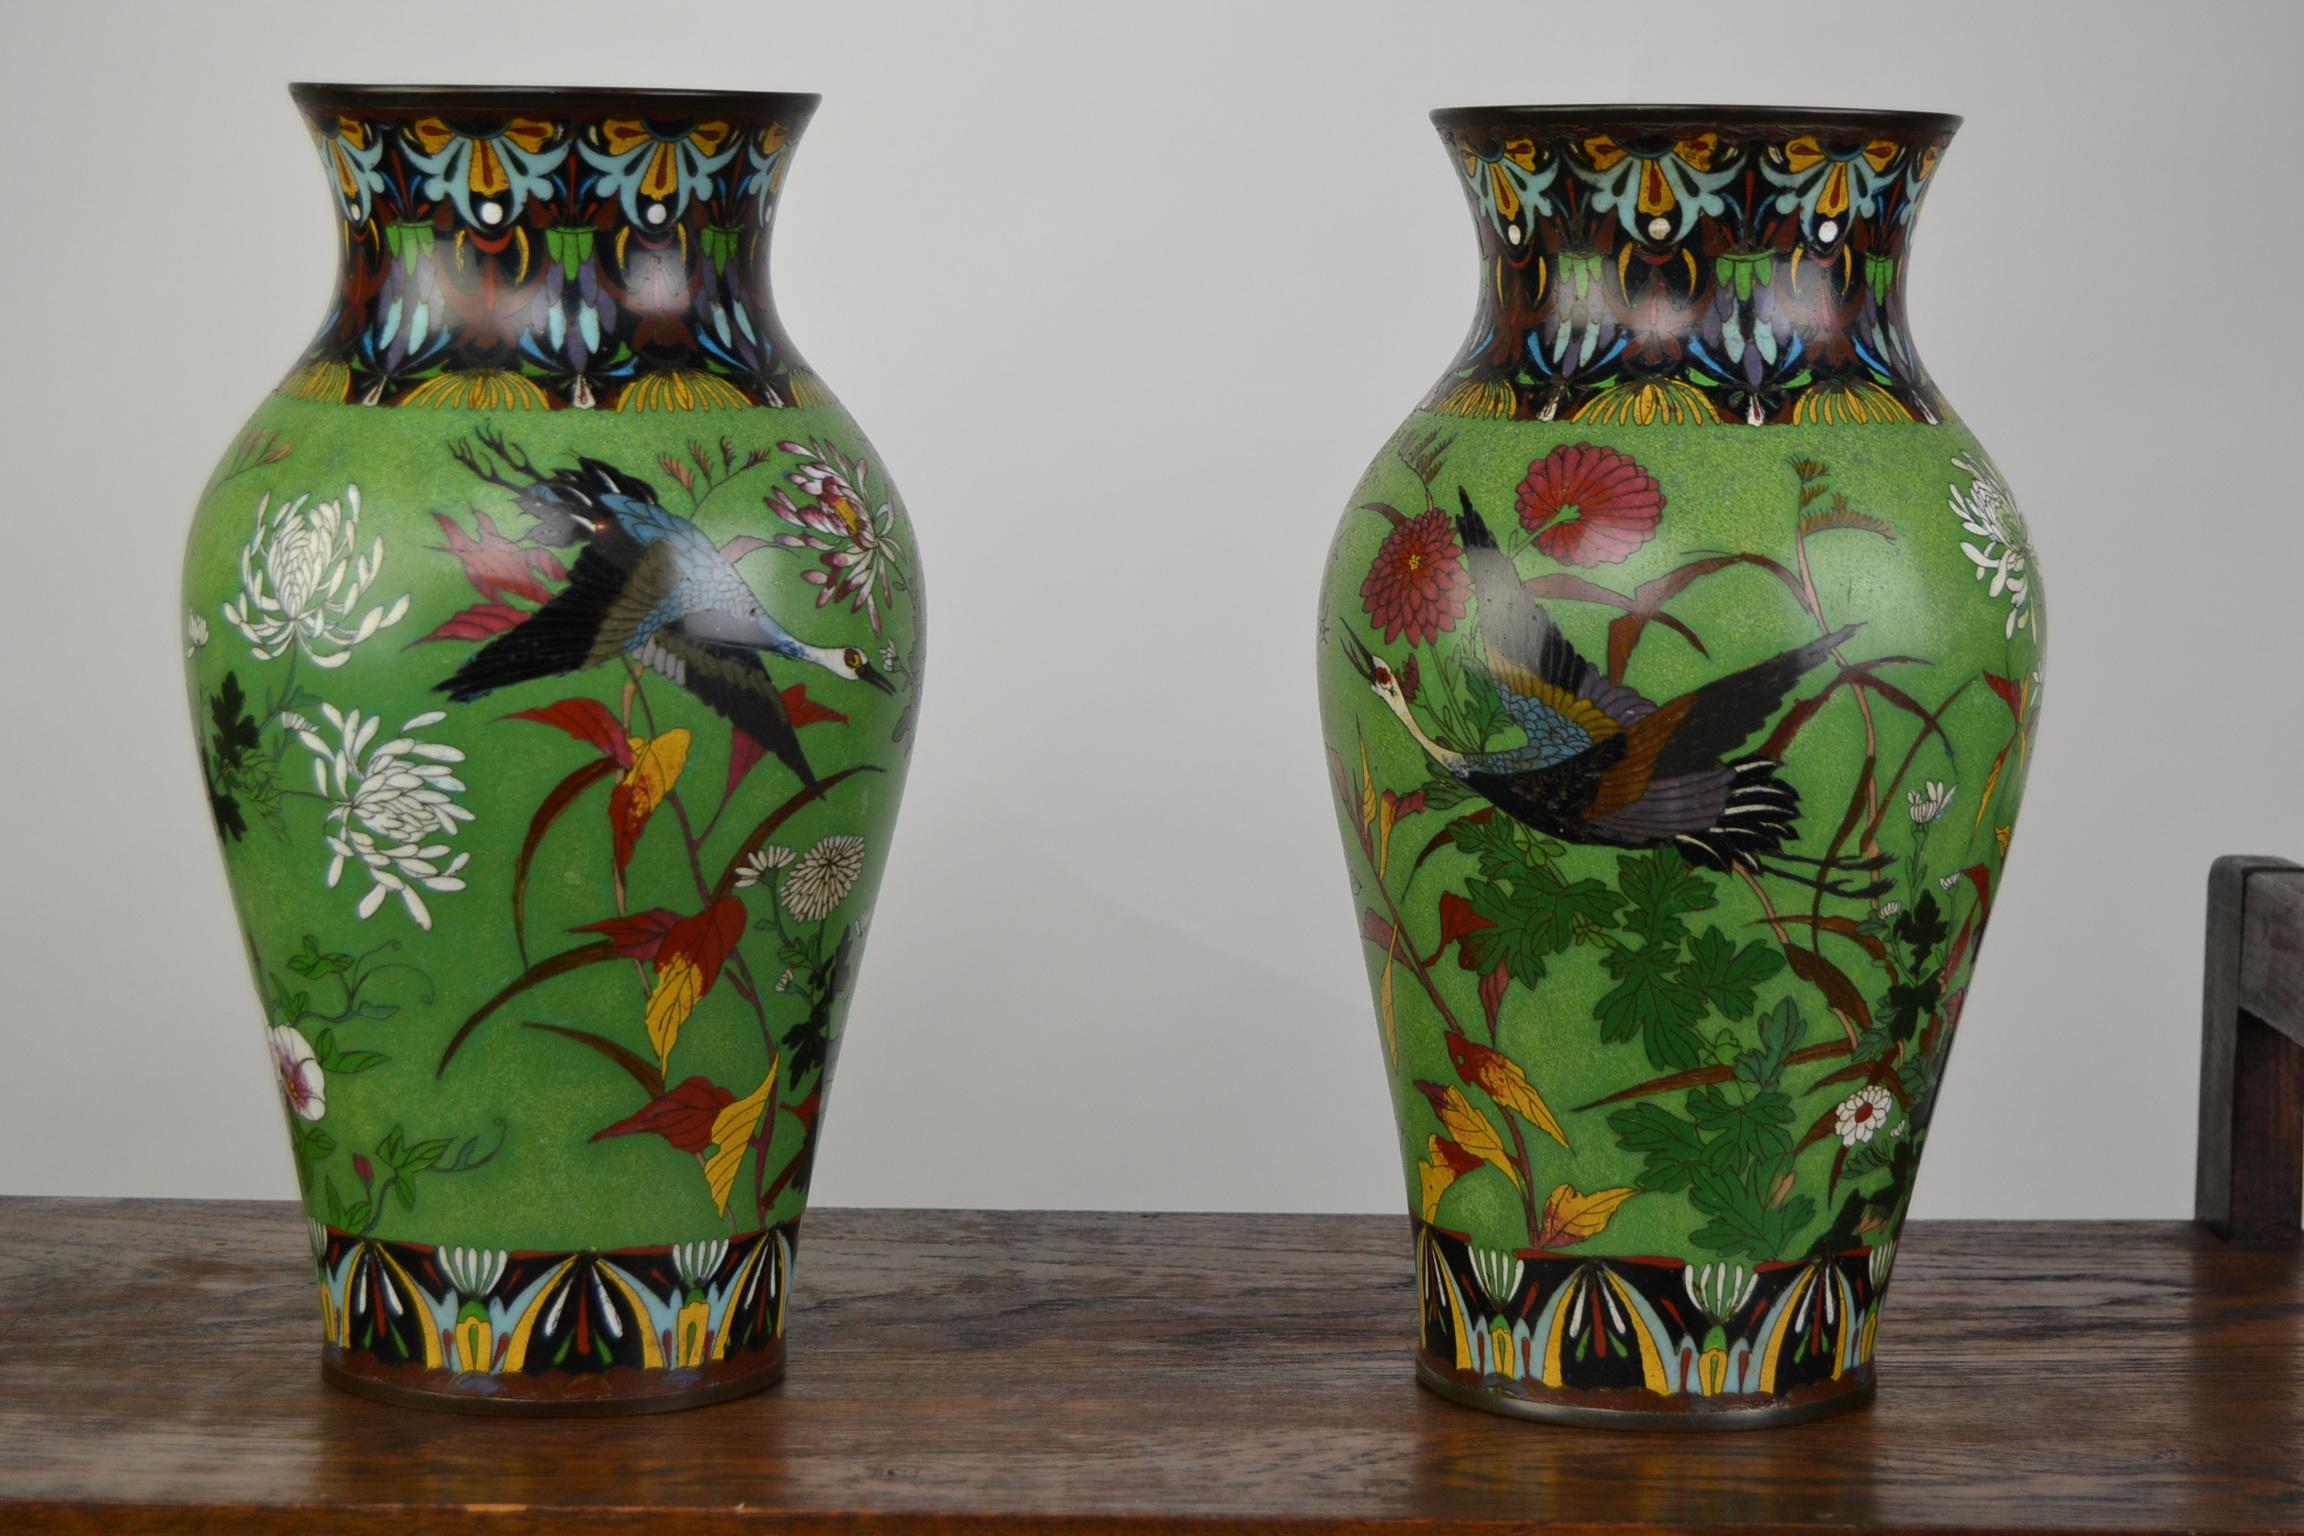 Pair of Japanese Cloisonne Enamel on Copper Vases with Crane Birds and Flowers  6